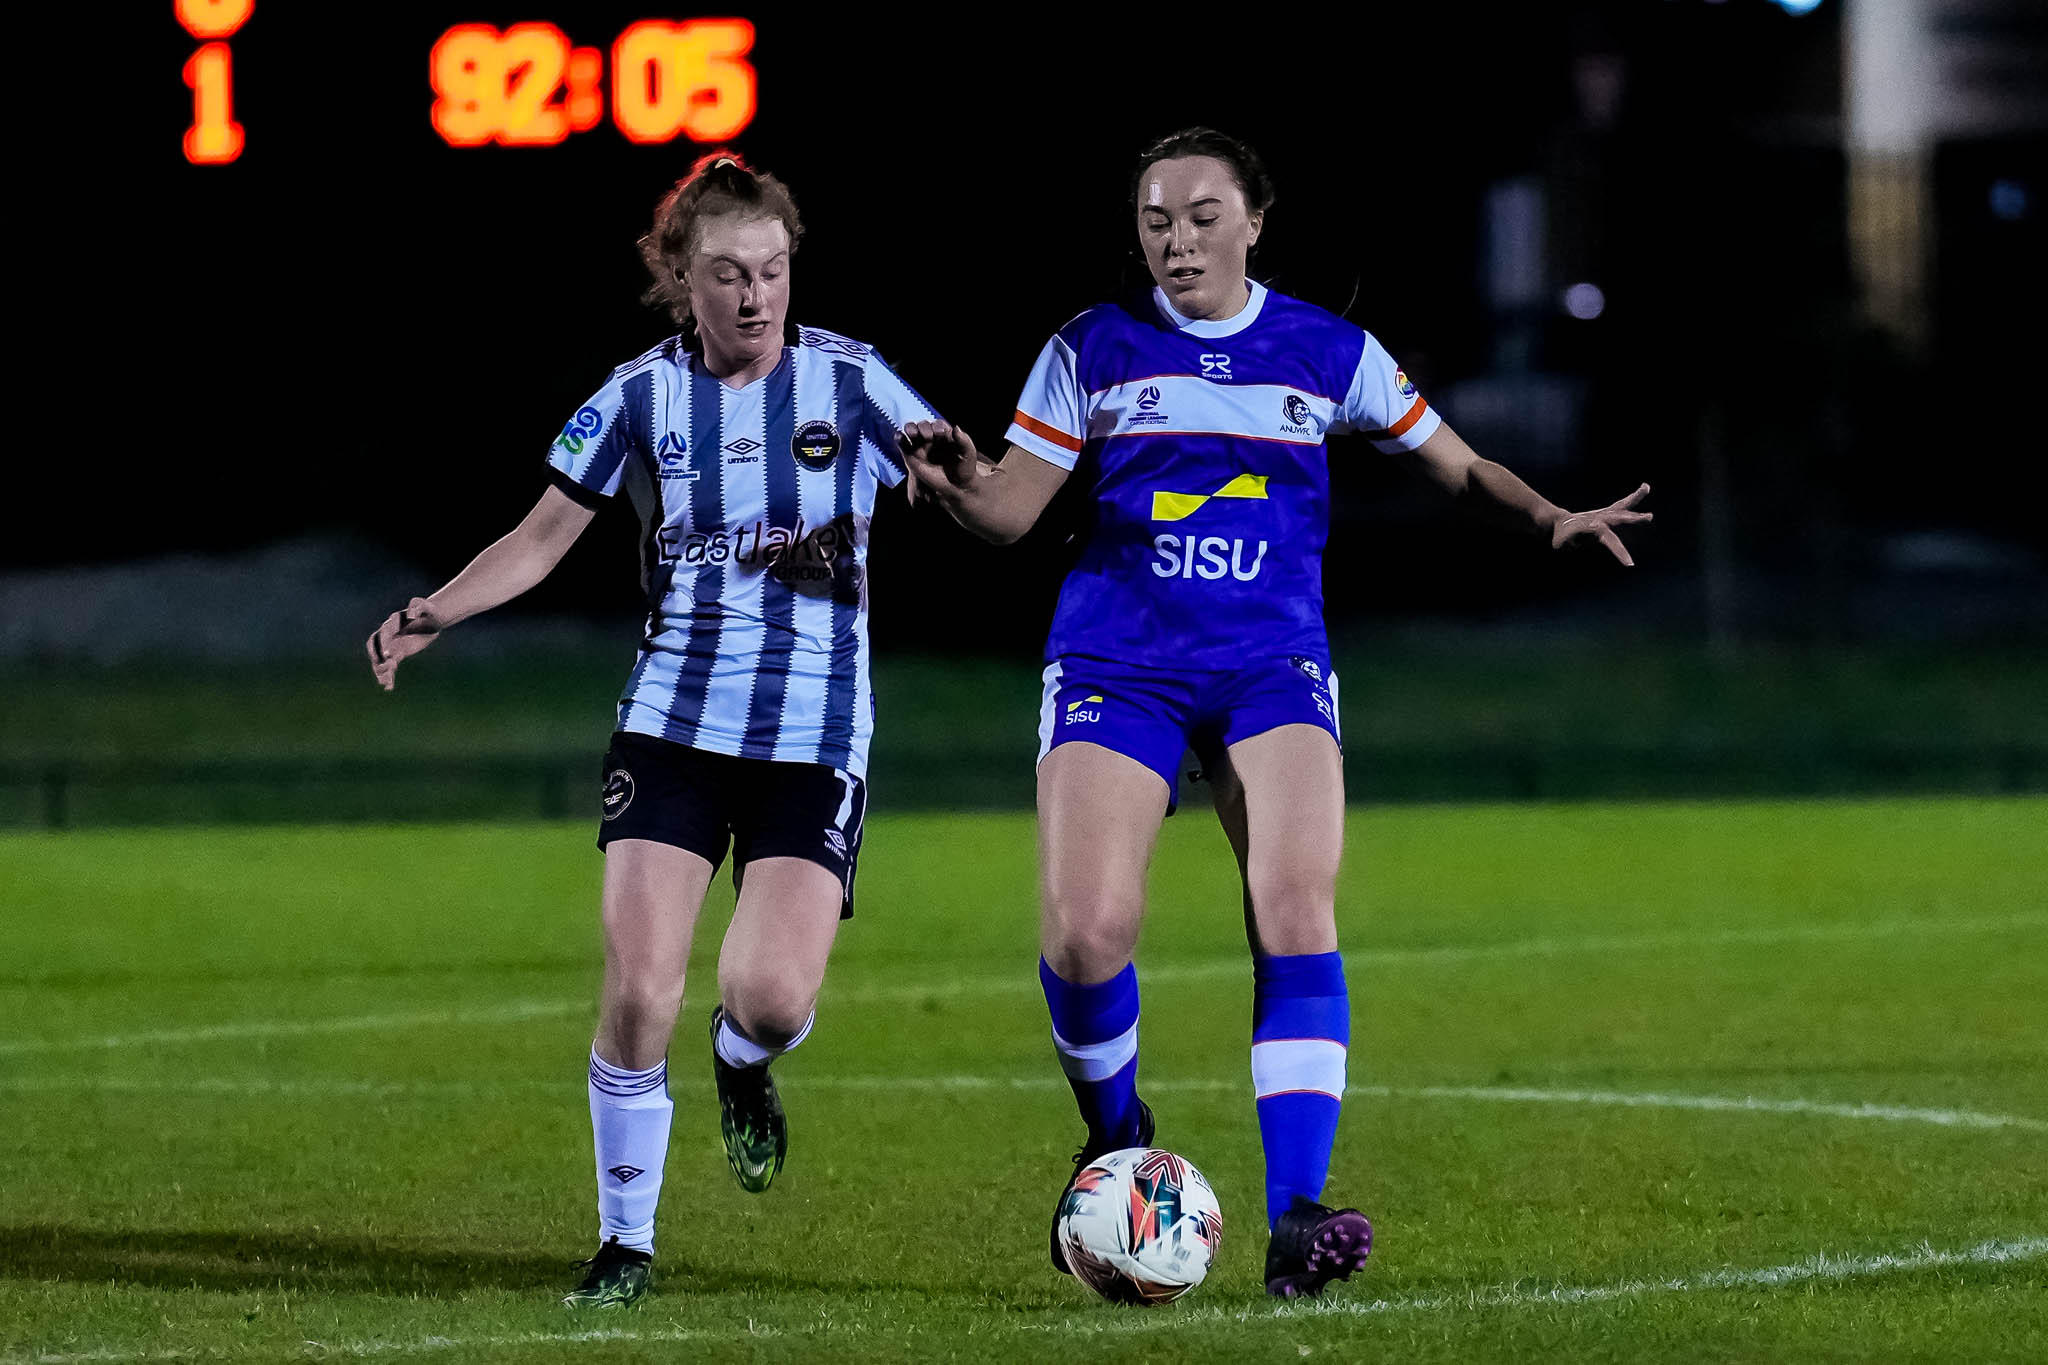 PREVIEW – NPL WOMEN: FINAL ROUND THROWS UP INTRIGUING CLASHES - Capital ...